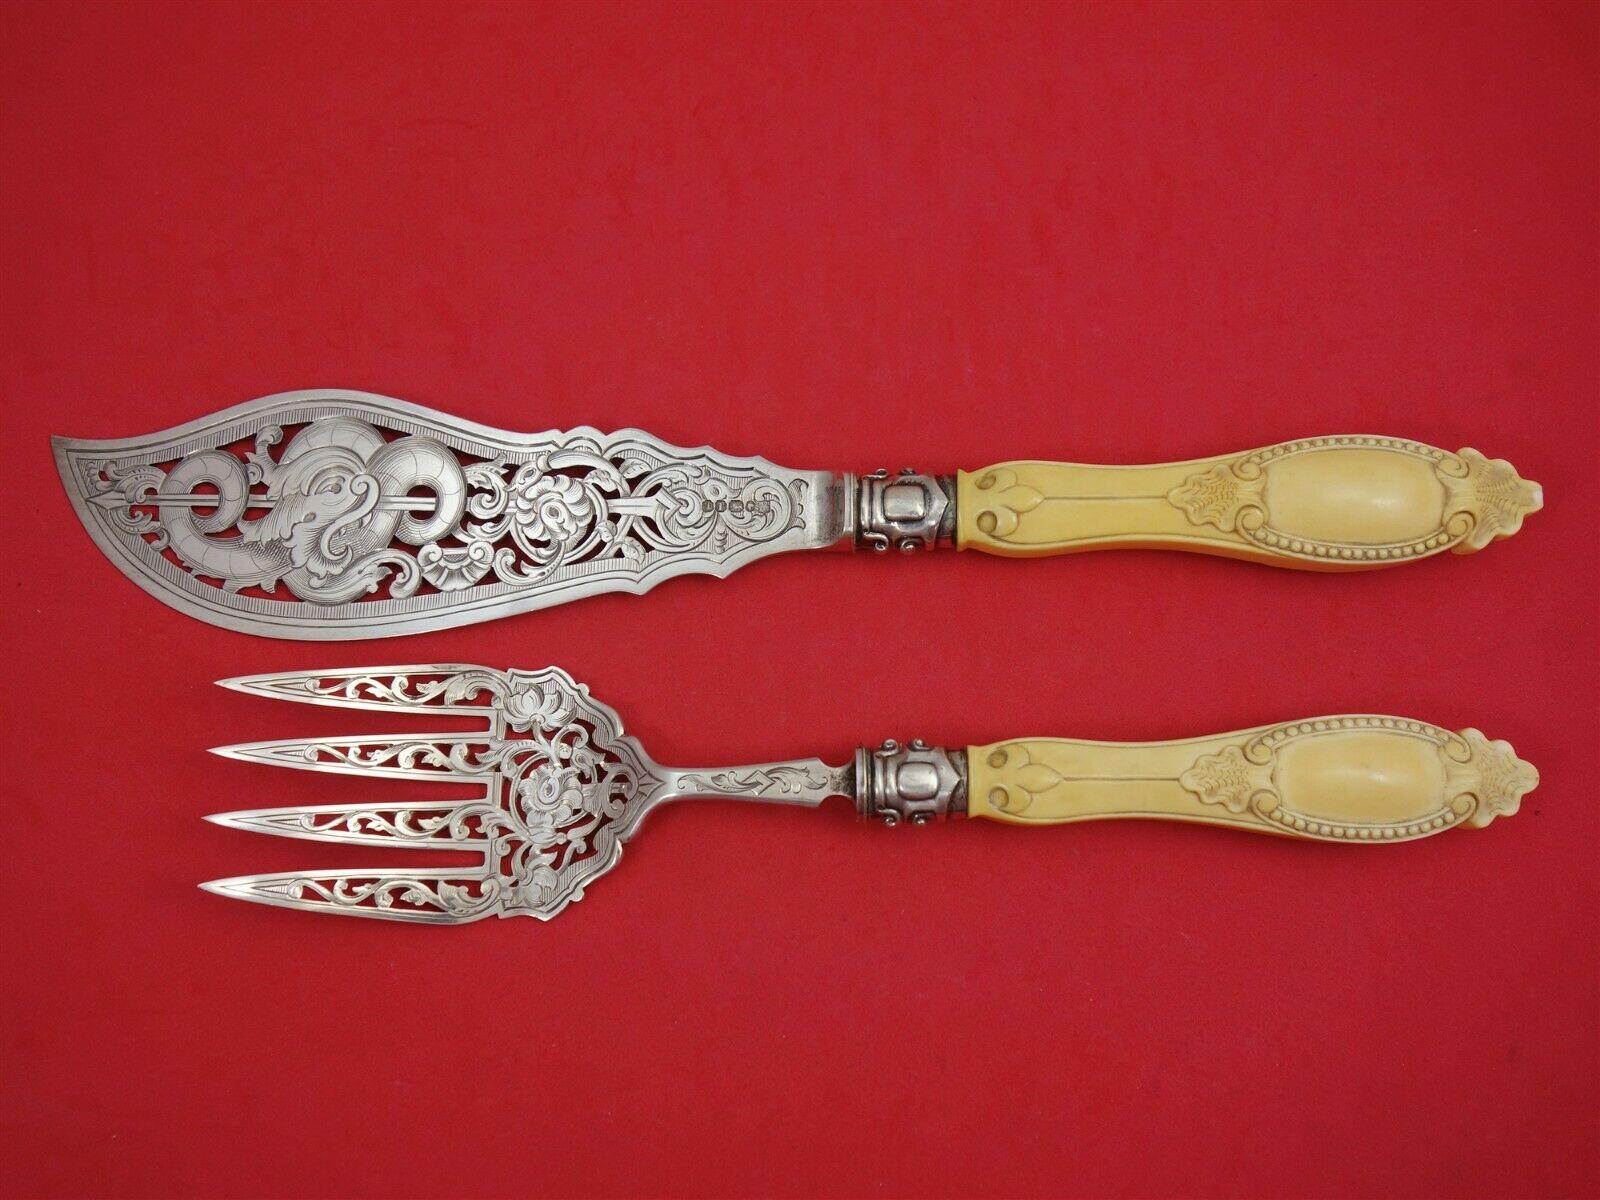 Martin Hall and Co


Incredibly detailed English sterling fish serving set with carved bone handles. The large server is pierced with a sea serpent on trident. Made by Martin, Hall & Co of Sheffield, England with date mark for 1861. Server